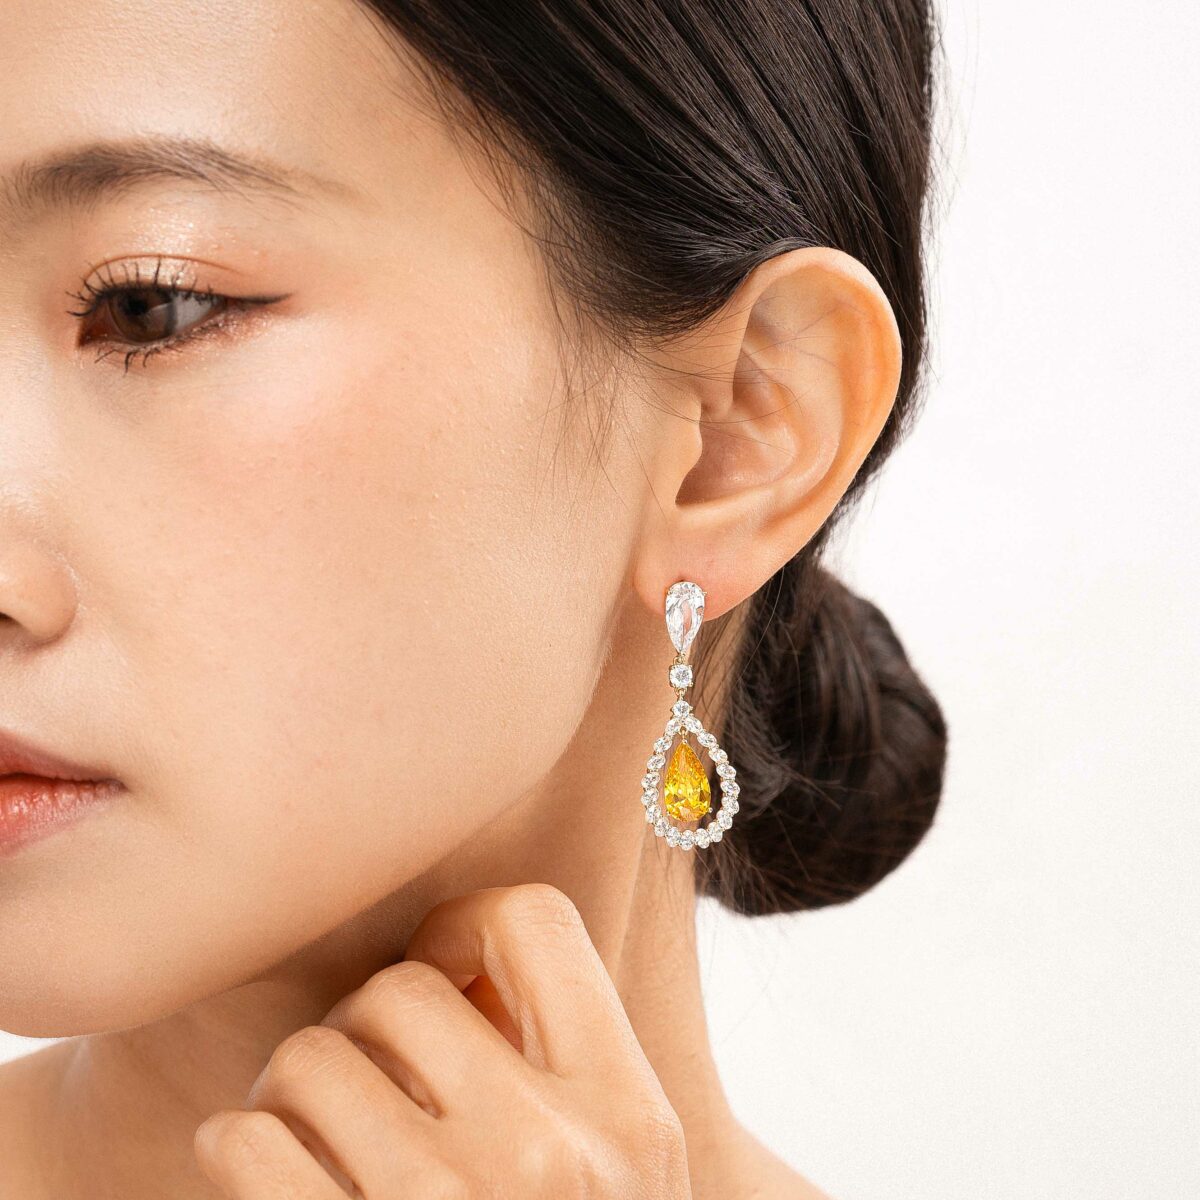 https://m.clubbella.co/product/magma-14k-gold-plated-crystal-earrings/ MAGMA CRYSTAL EARRINGS (1)